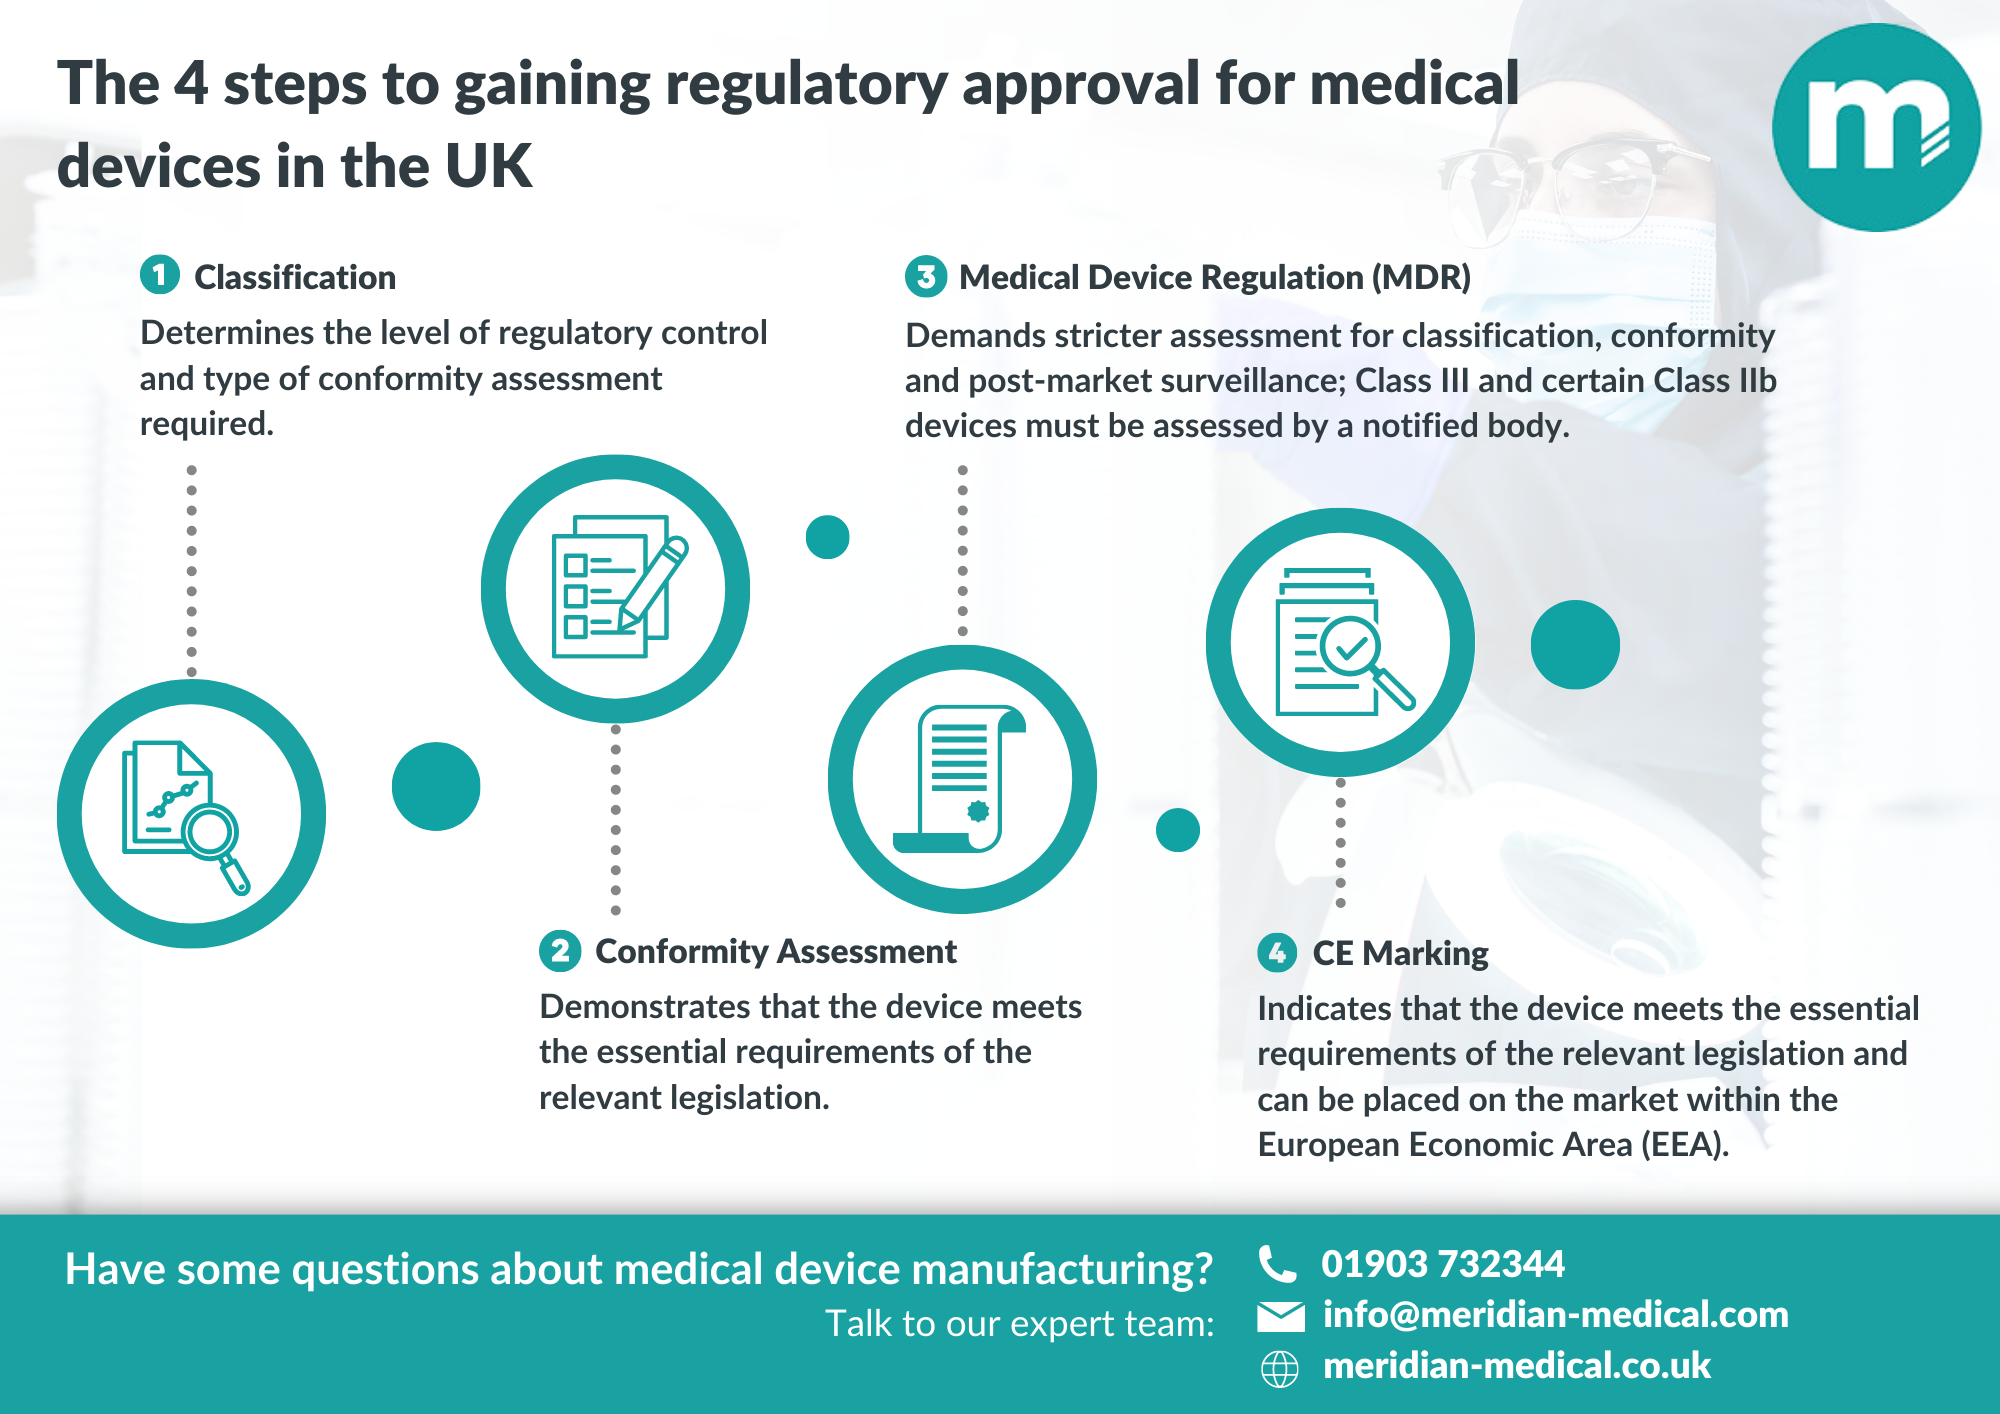 The 4 steps to gaining regulatory approval for medical devices in the UK